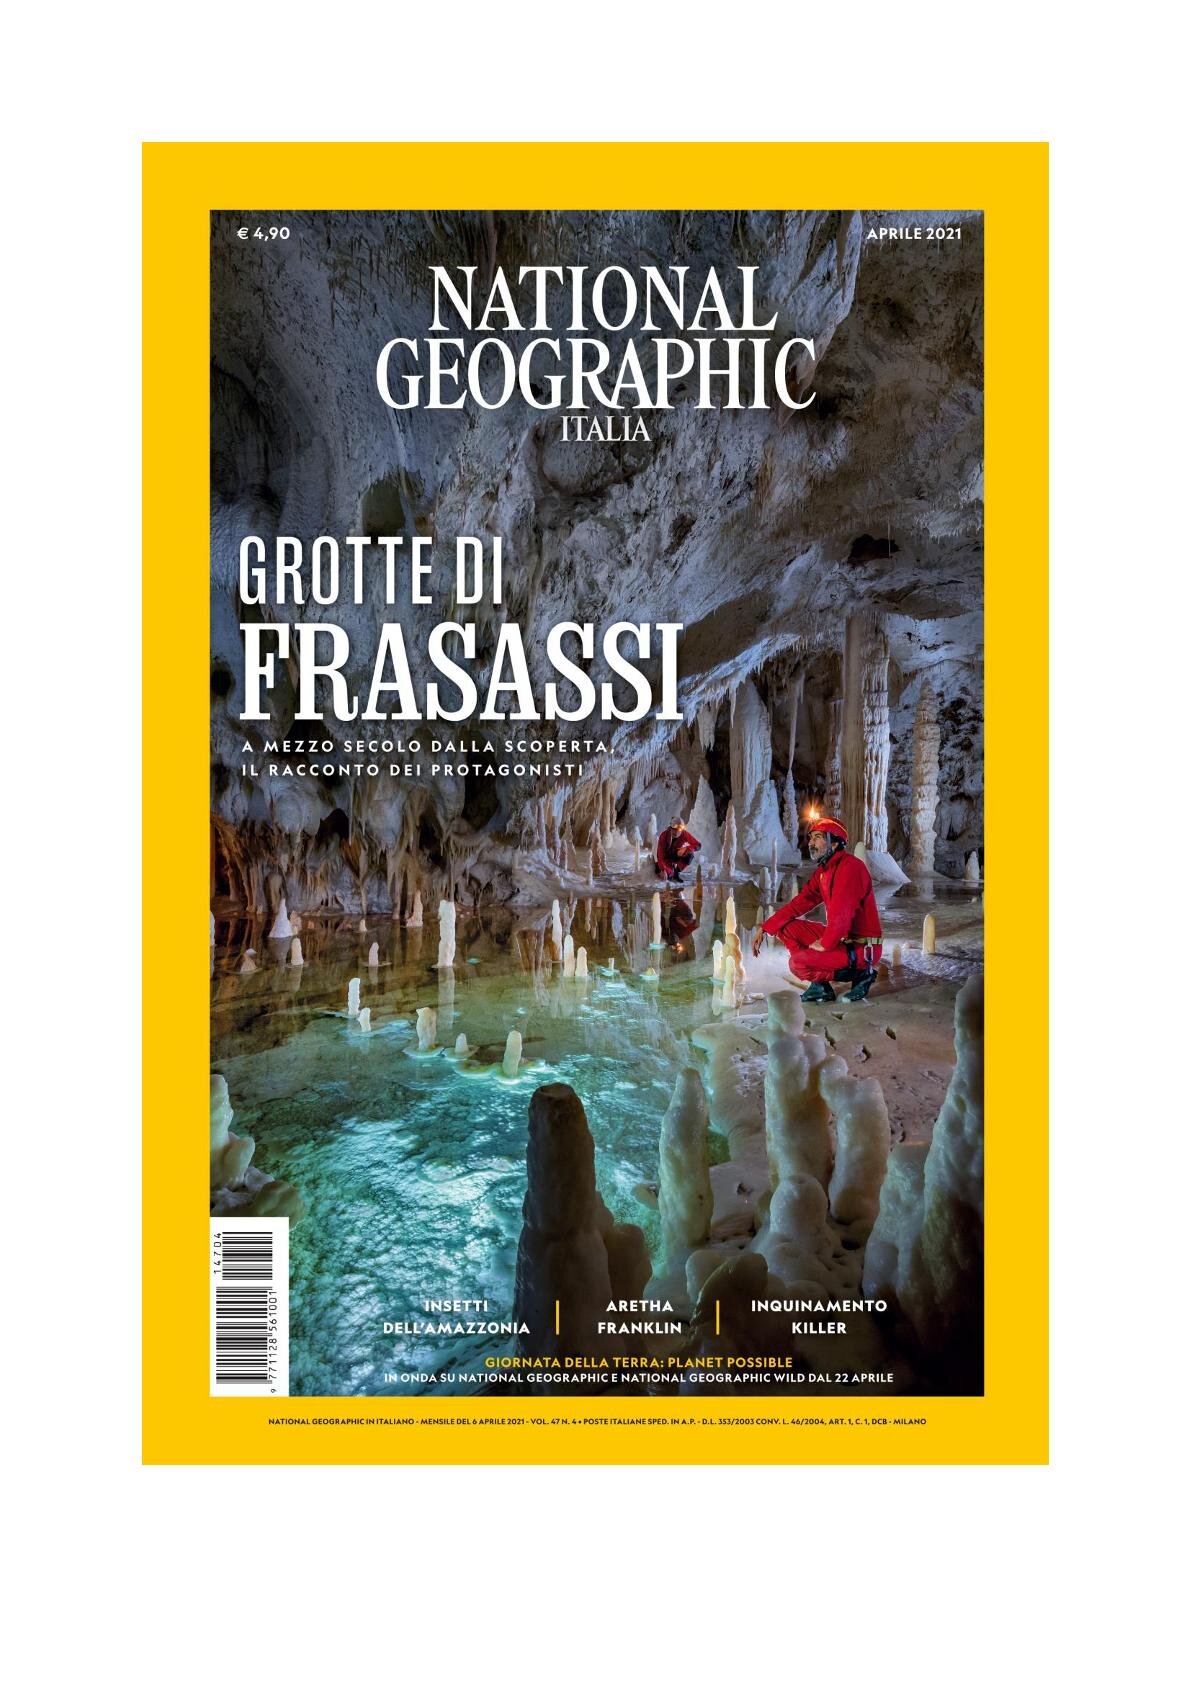 Cover edition 4/21 National Geographic Italia